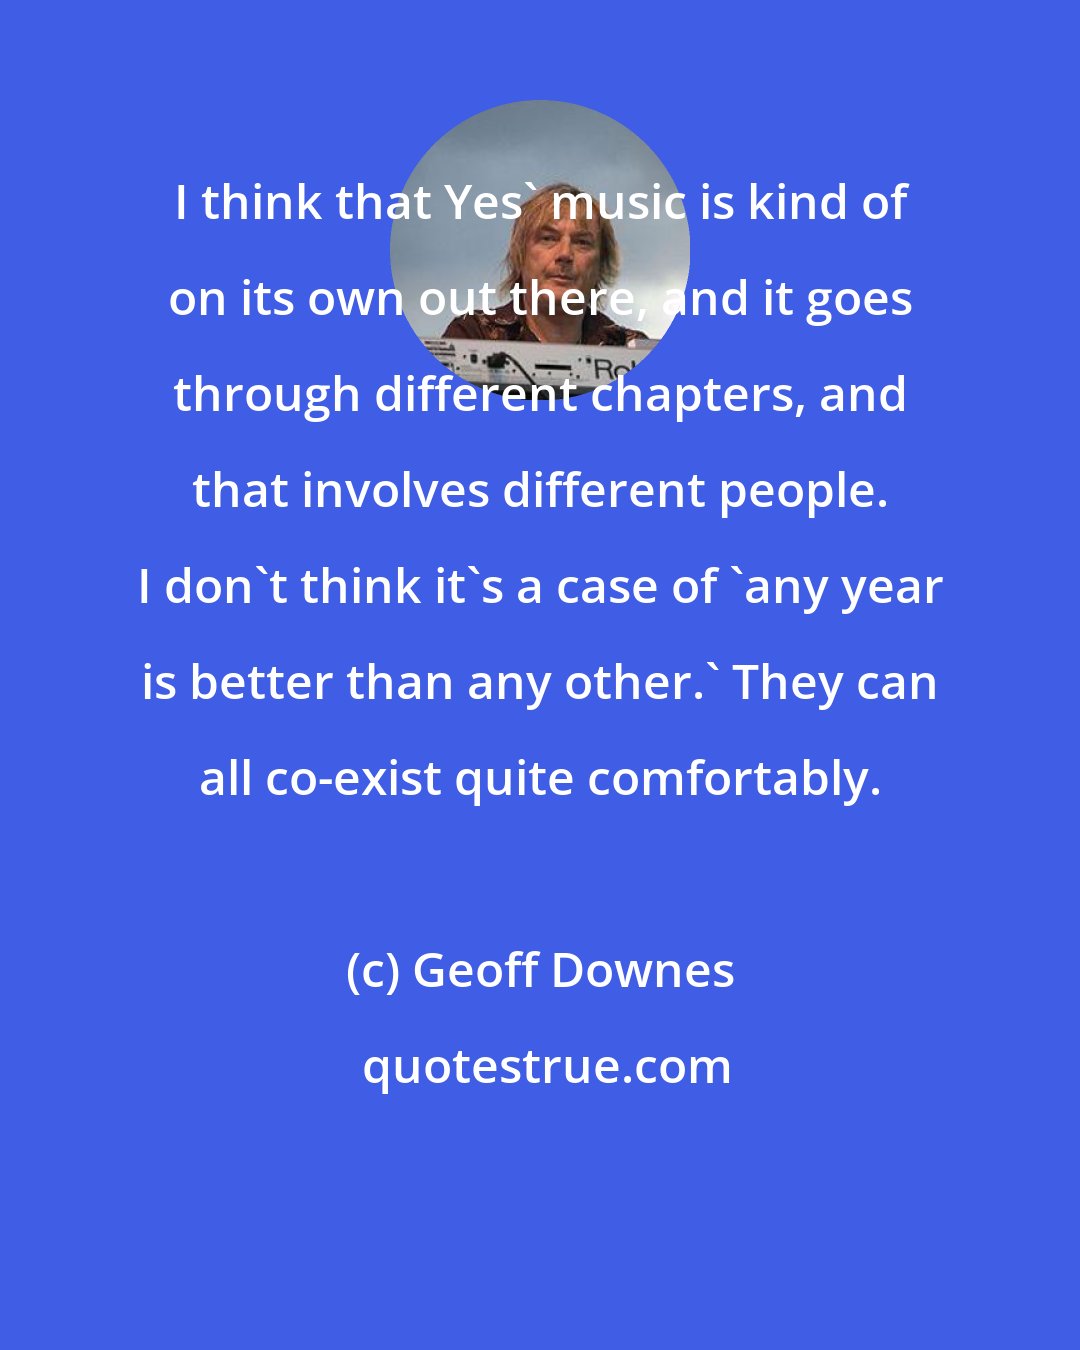 Geoff Downes: I think that Yes' music is kind of on its own out there, and it goes through different chapters, and that involves different people. I don't think it's a case of 'any year is better than any other.' They can all co-exist quite comfortably.